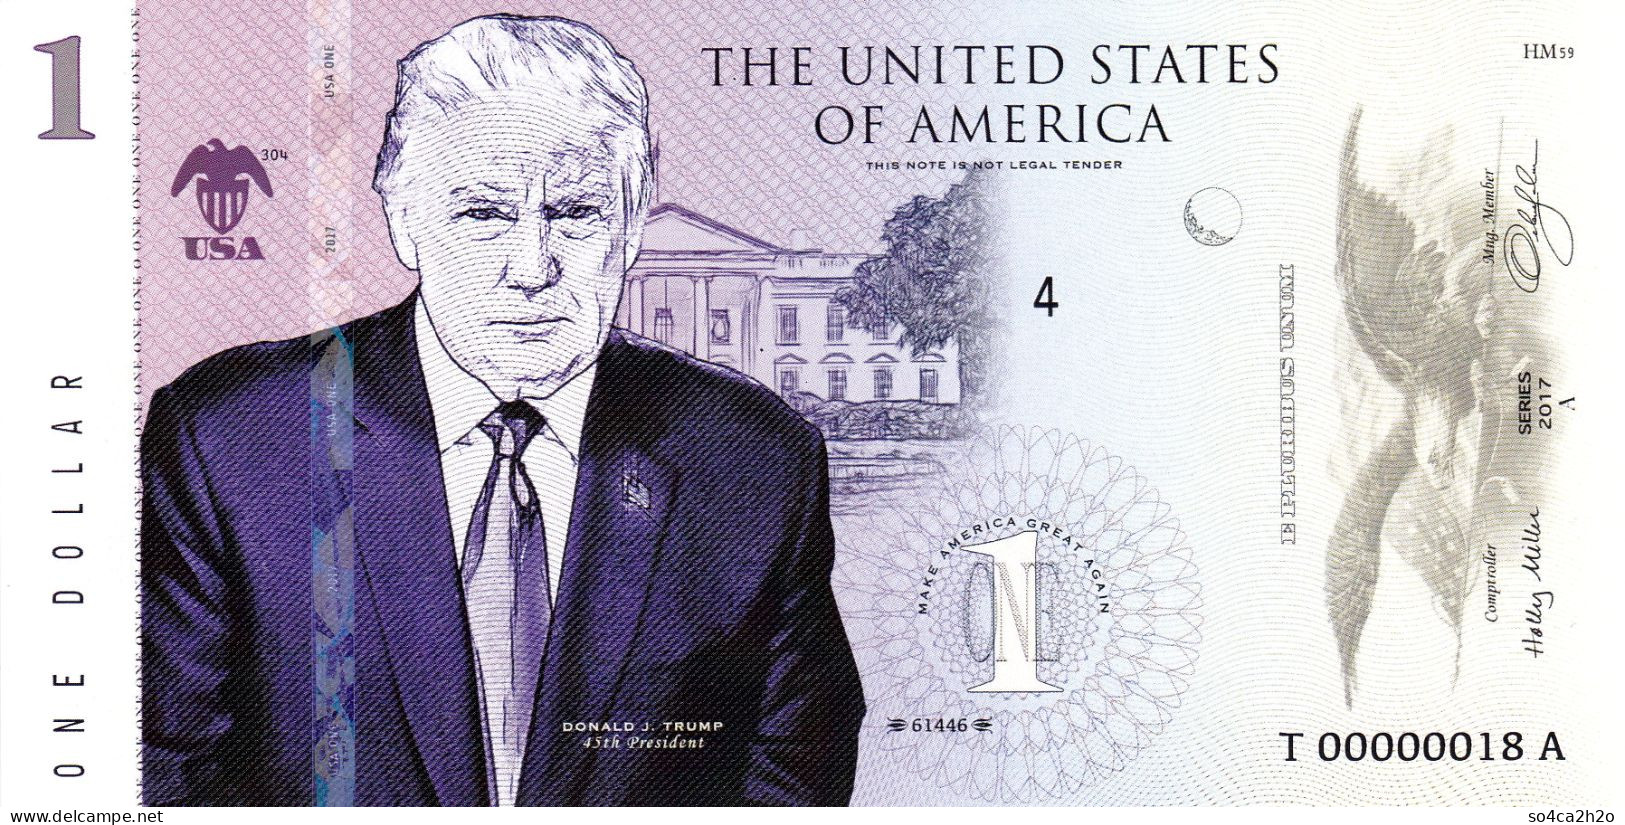 MUJAND The United States Of America 1 Dollar 2017 Polymer Série Limitée 500 Exemplaires - Fictifs & Spécimens